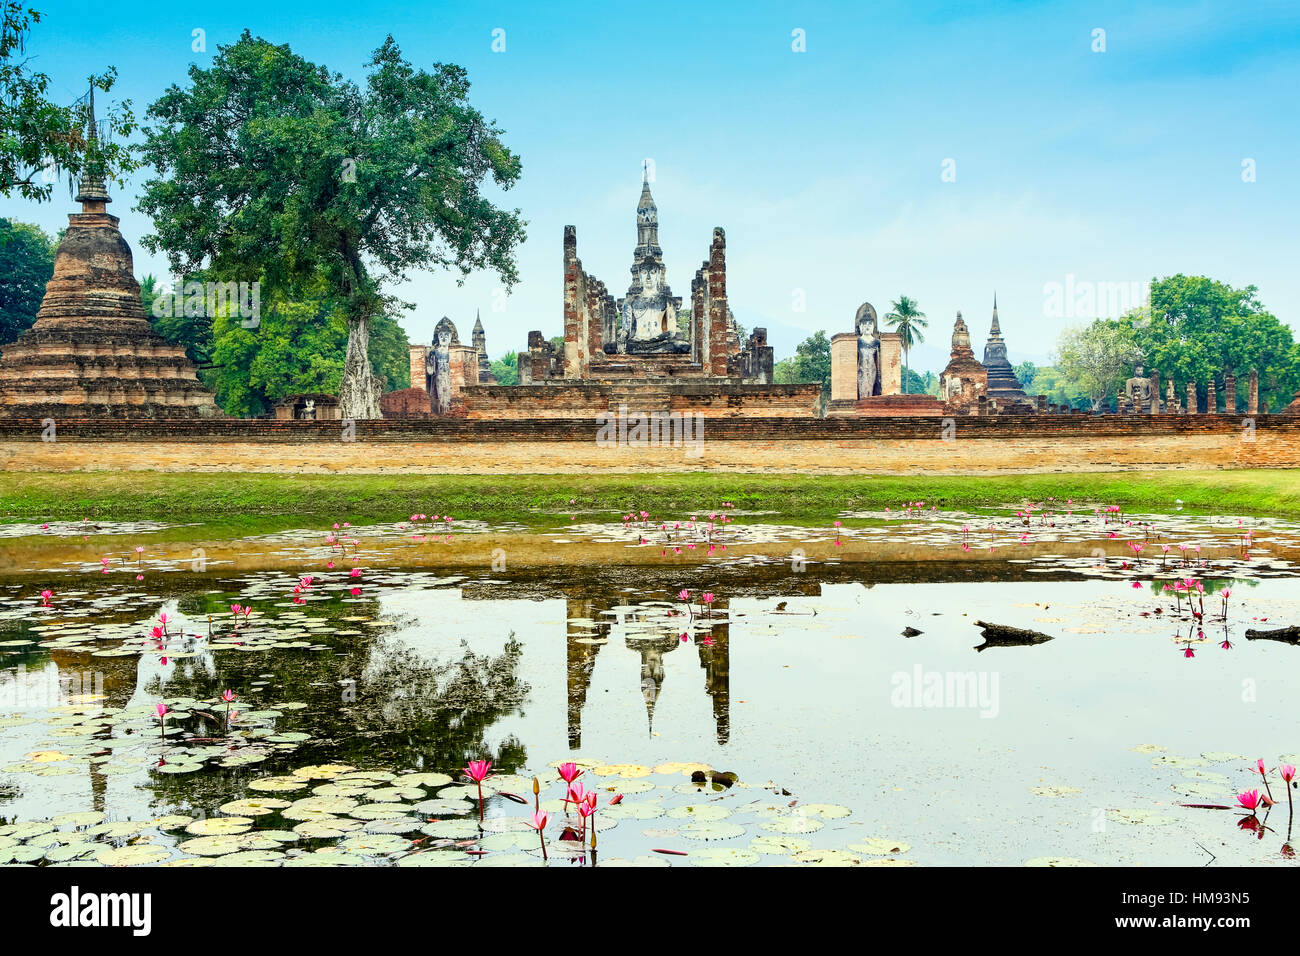 Wat Mahathat in the Sukhothai Historical Park, Thailand, Southeast Asia Stock Photo